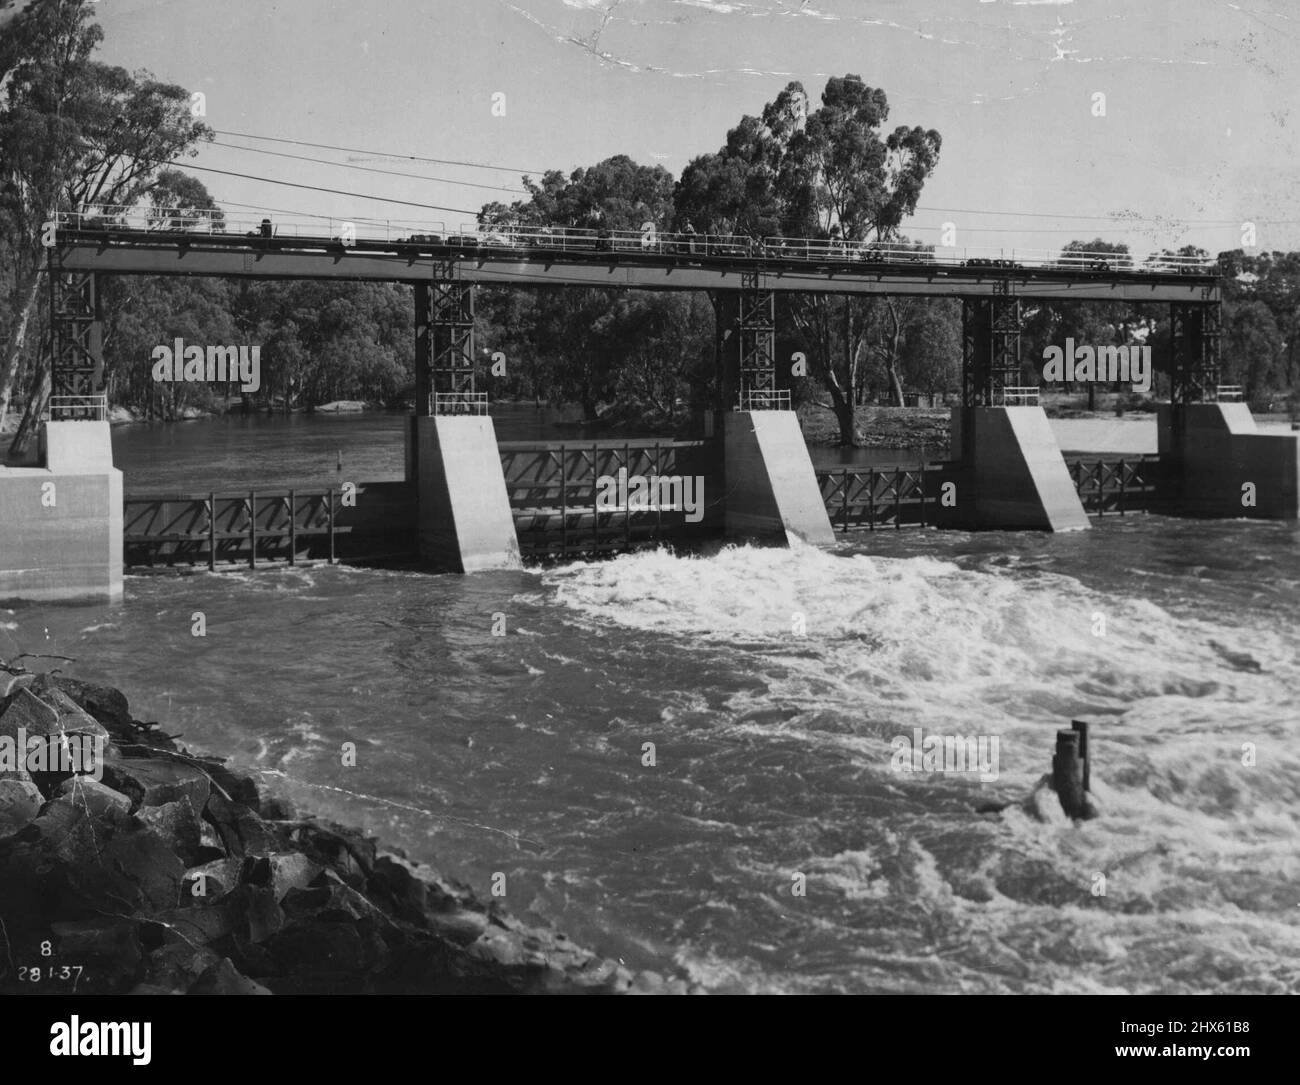 Irrigation -- Loan funds are required for the extension of irrigation. This photograph shows Stevens Weir on the Edward River. This weir diverts water to the Wakool Irrigation District. Other lands now being developed for food production require life giving water. The 17th Security Loan aims to provide the funds necessary to bring water to the parched outback. Rainwater in great coastal catchment dams like the Warragamba, Avon and Nepean could be diverted inland to help open up new country to c Stock Photo